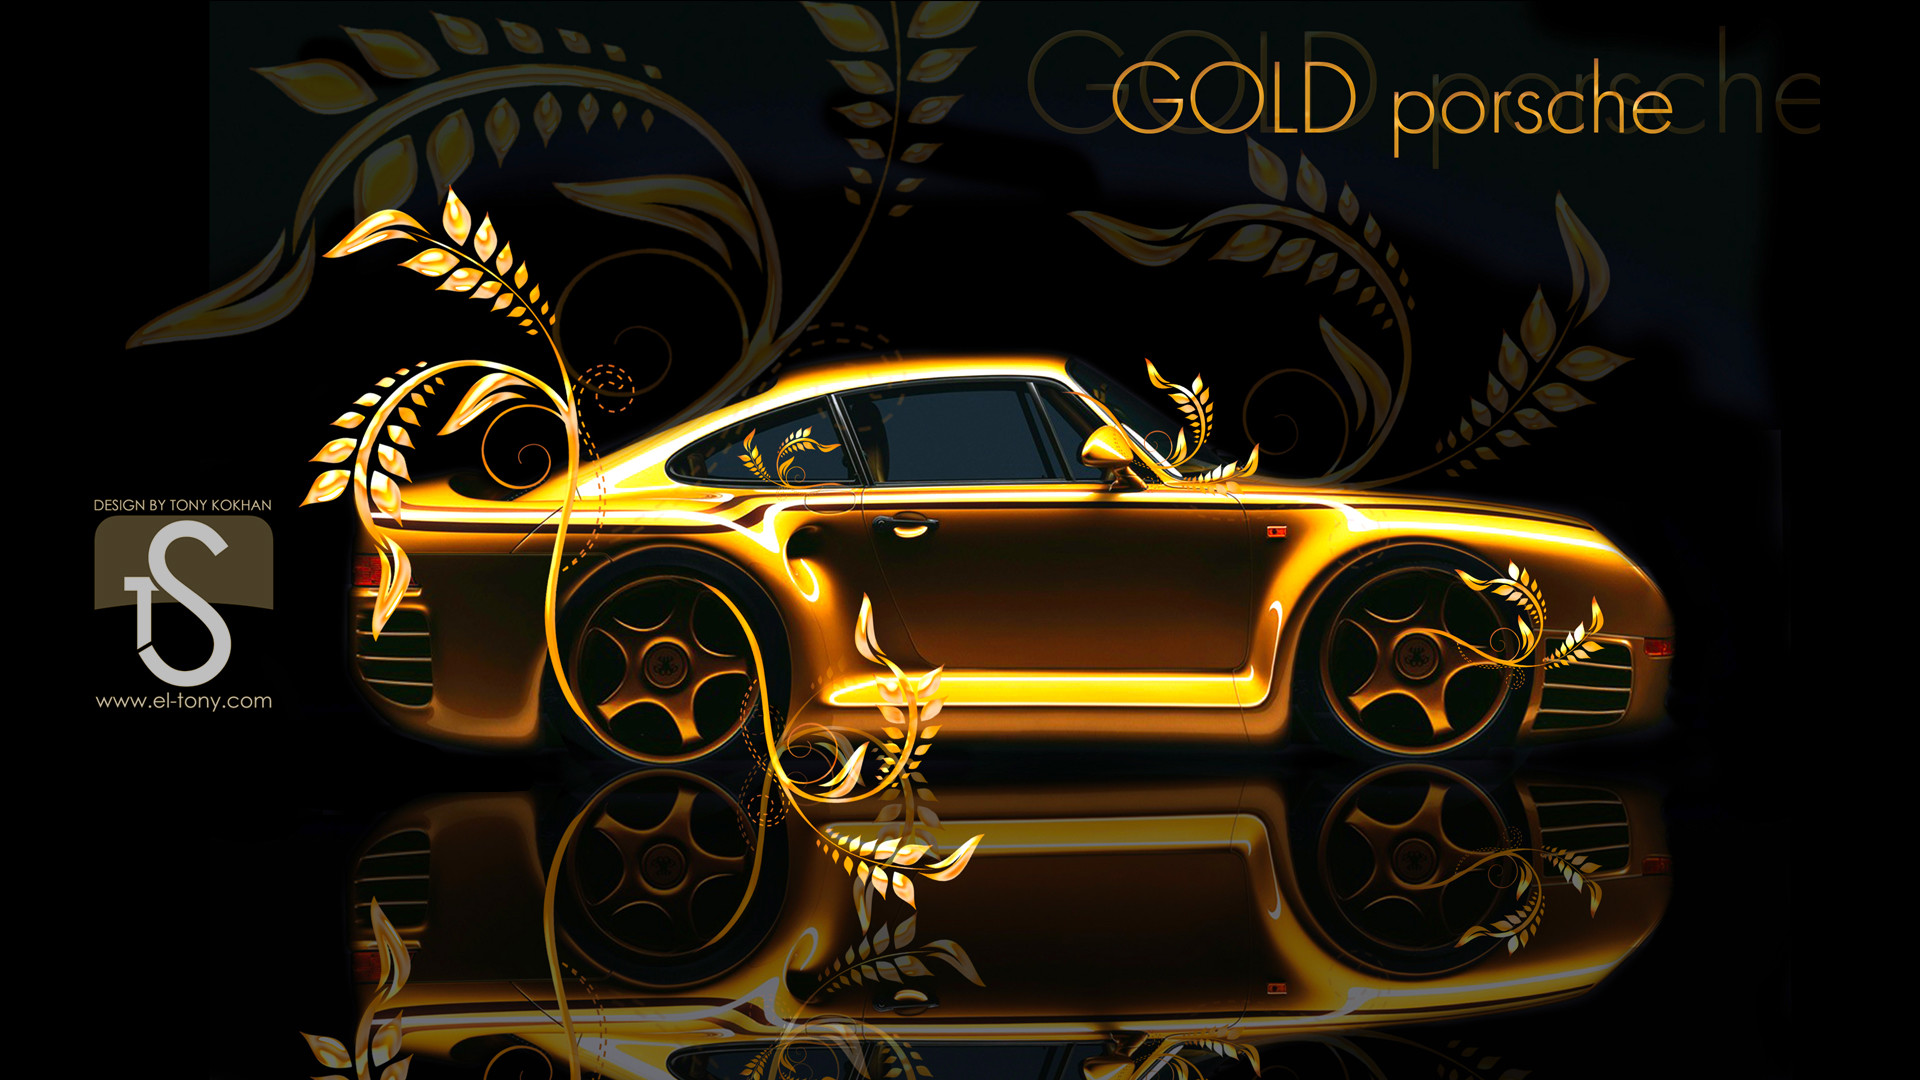 Wallpapers Tagged With Gold - Golden Car Wallpaper Hd - HD Wallpaper 